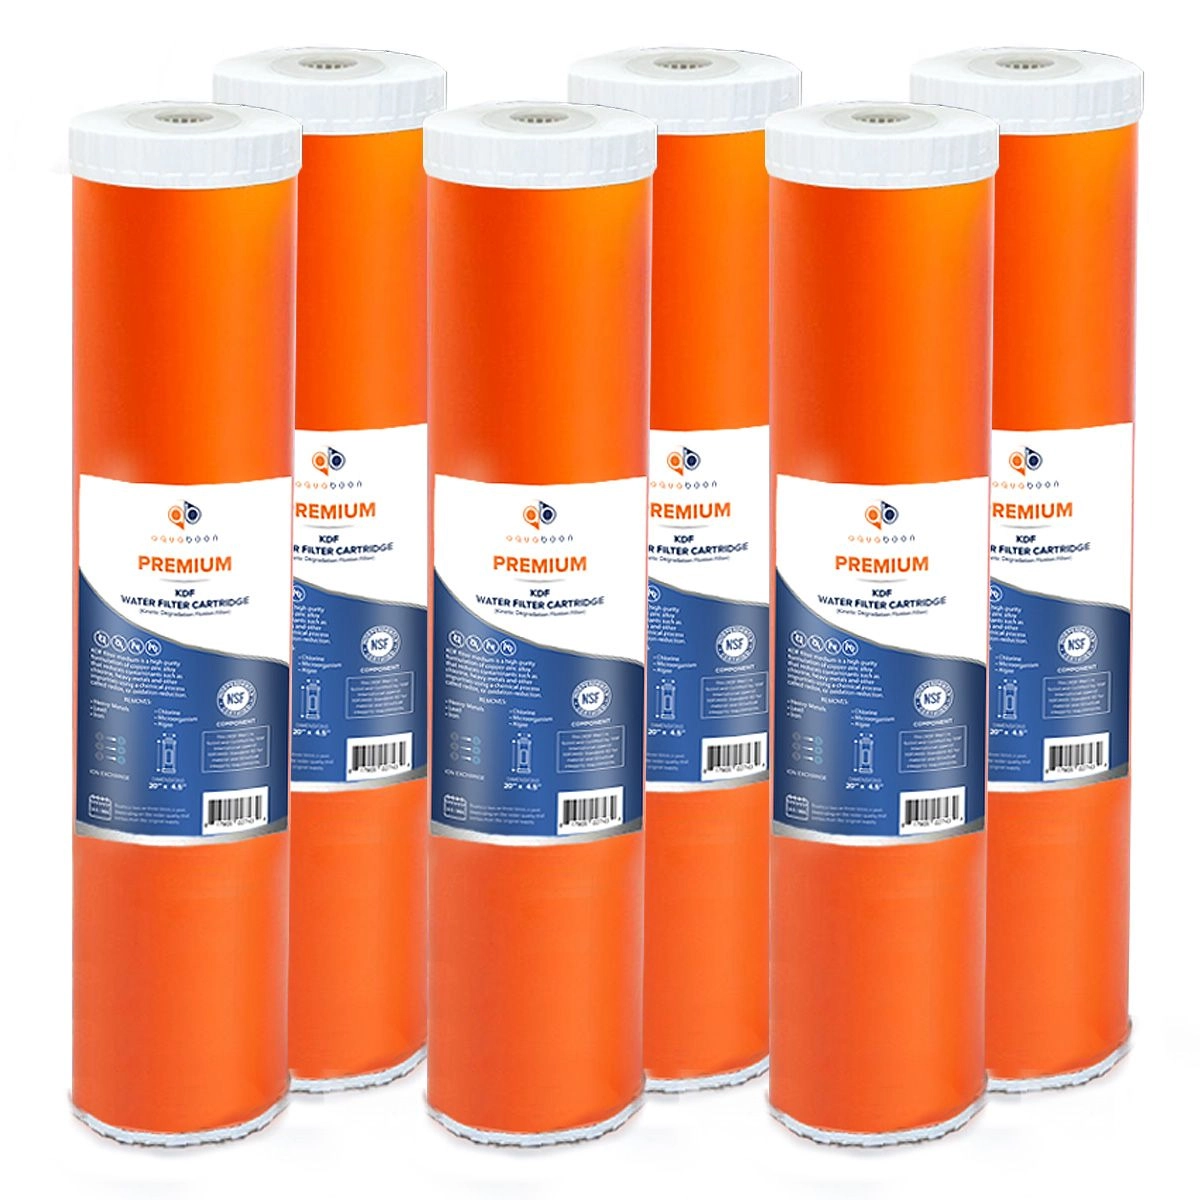 6 Pack Of Whole House KDF 20 x 4.5 Inch. Big Blue Replacement Water Filter Cartridge